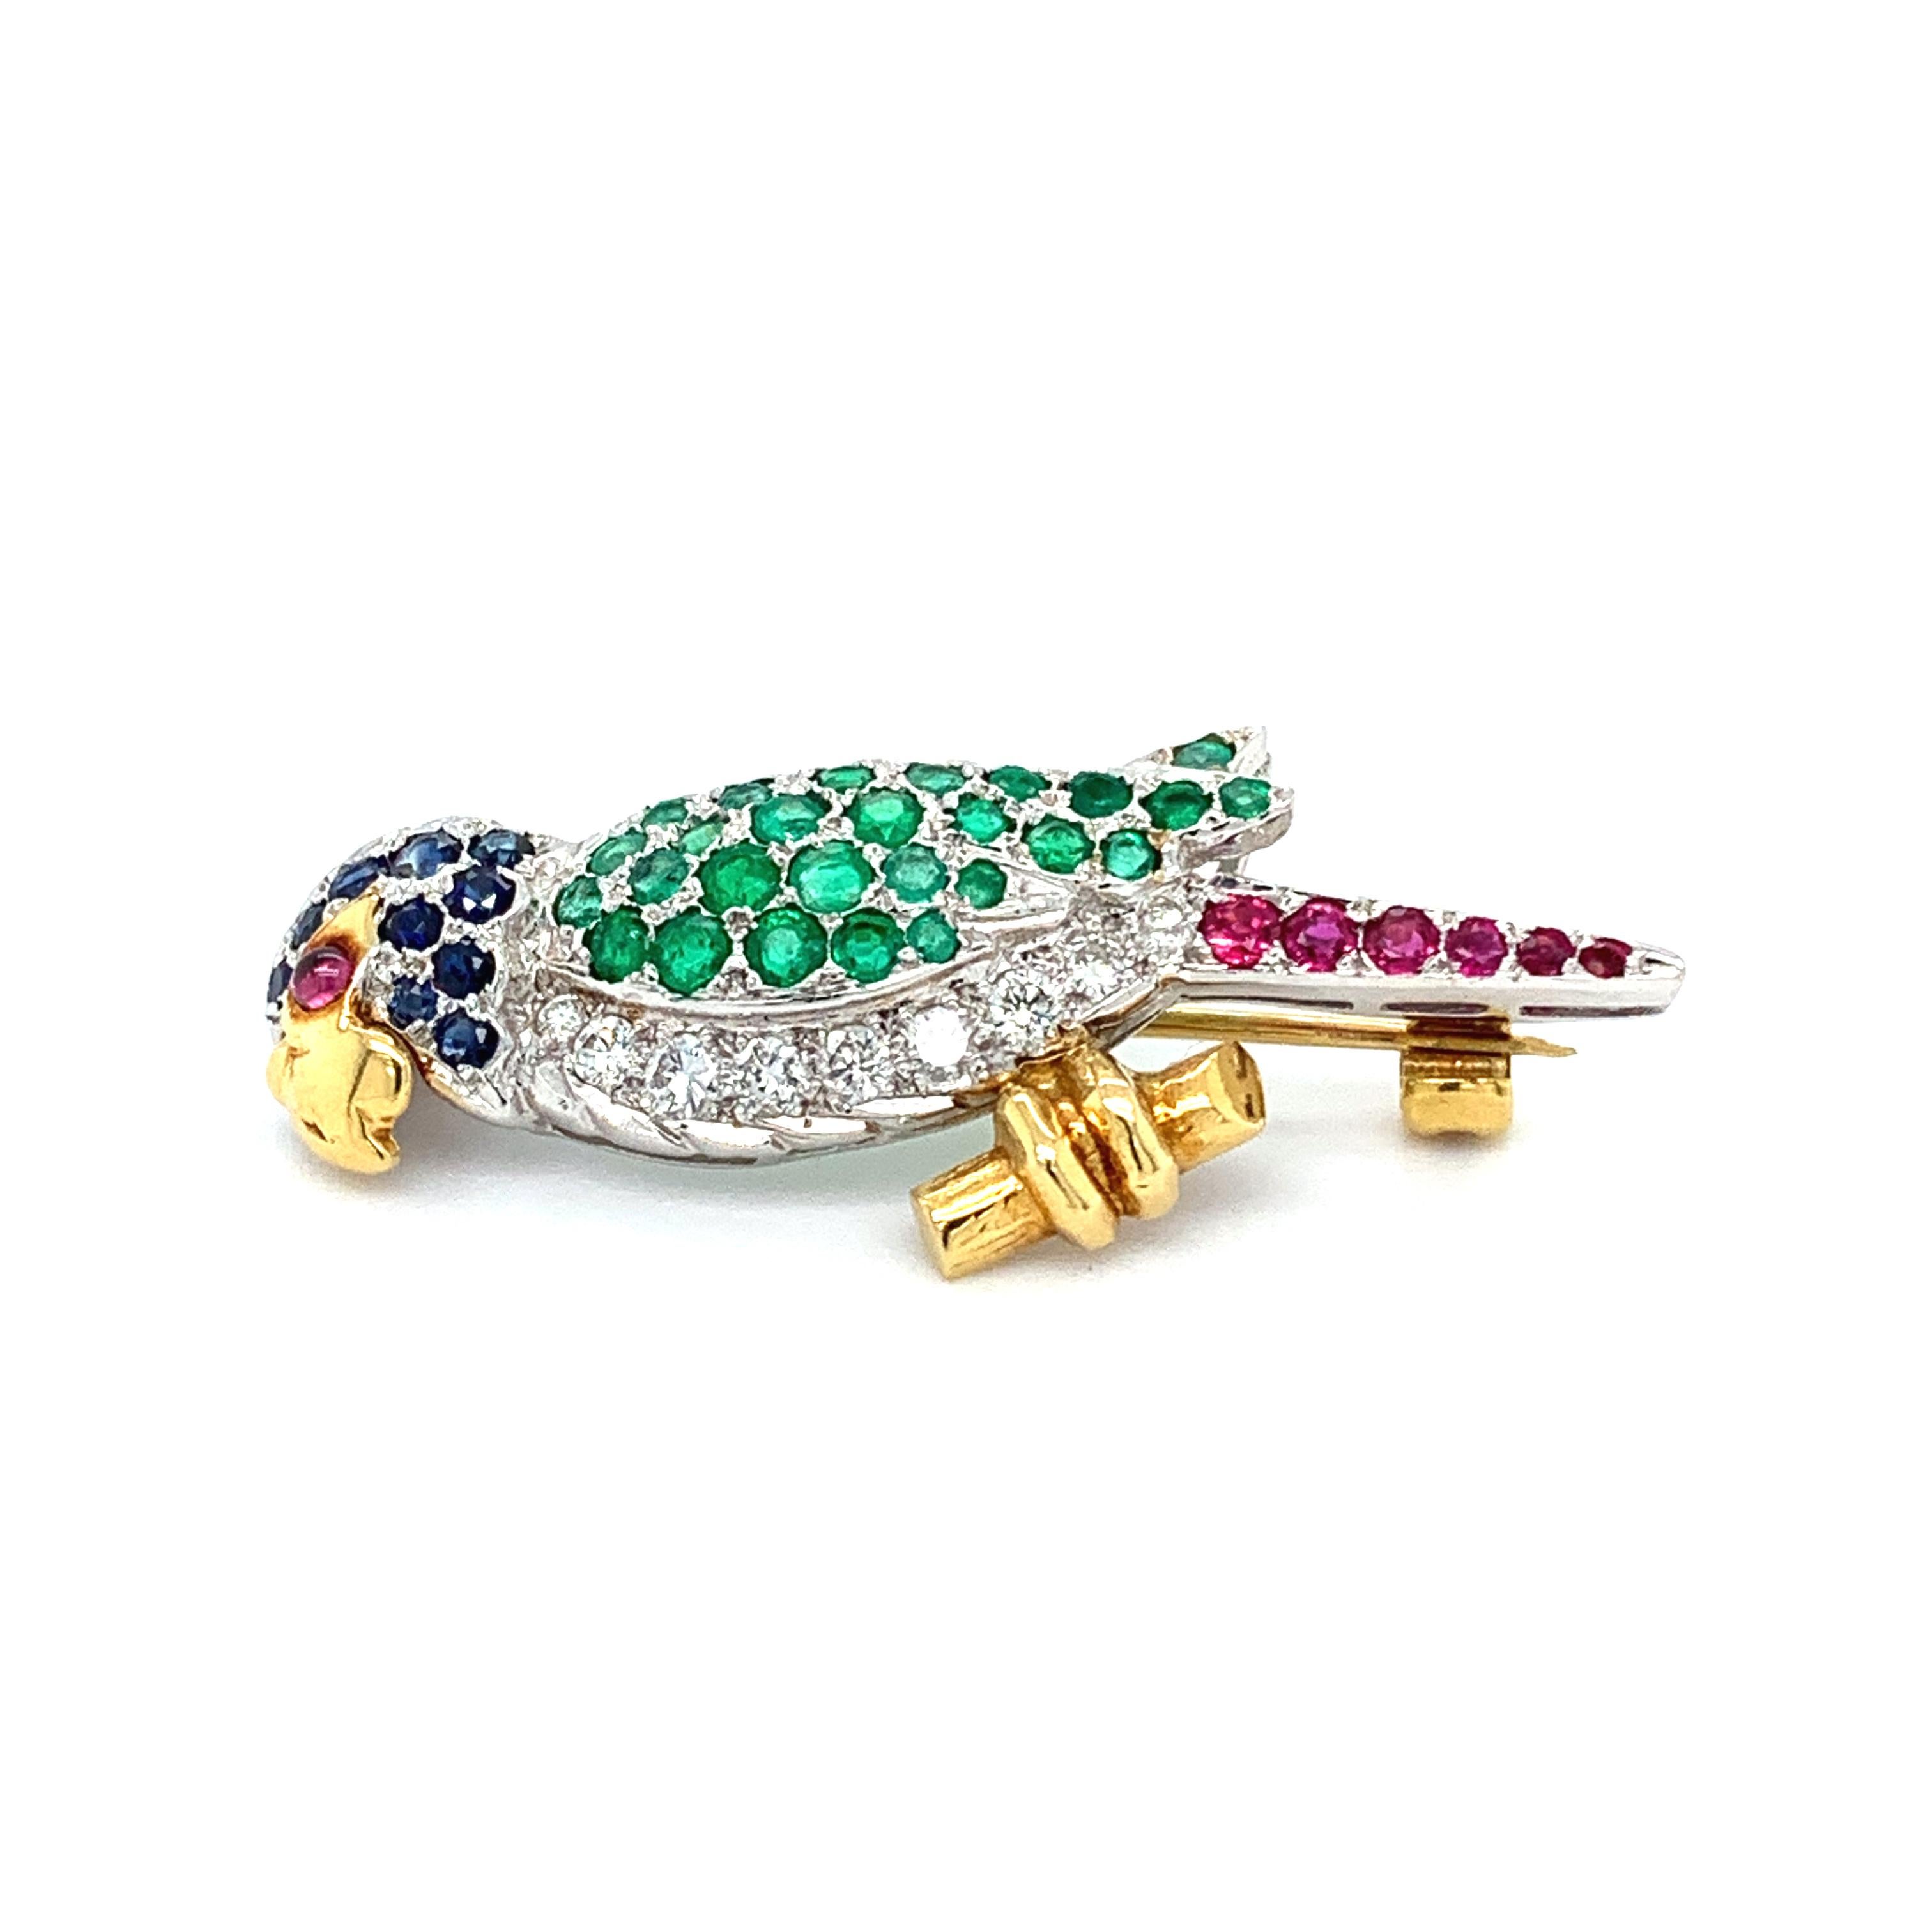 Diamond sapphire green emerald and ruby brooch 18k white gold In New Condition For Sale In London, GB